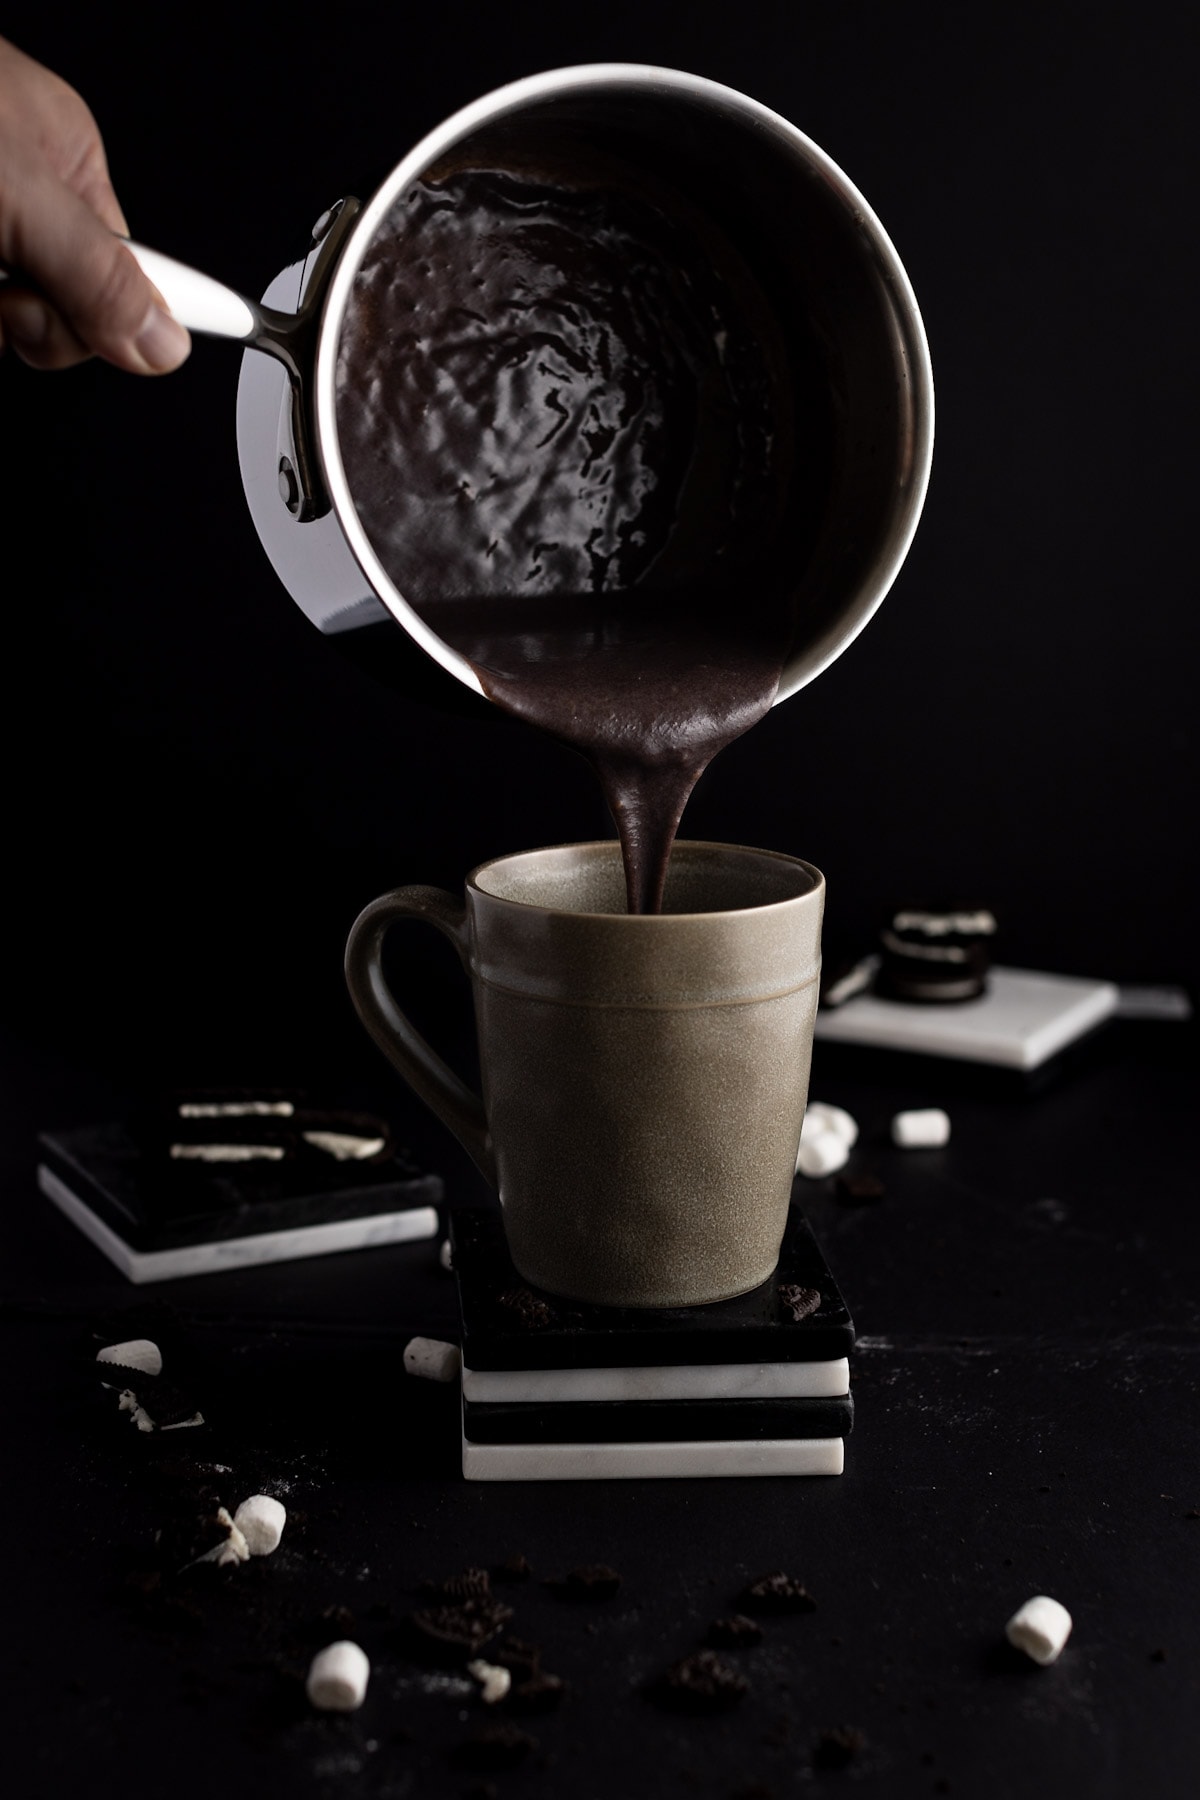 Oreo hot chocolate being poured from a metal saucepan into an olive green mug, on a stack of black and white coasters, with a black background.